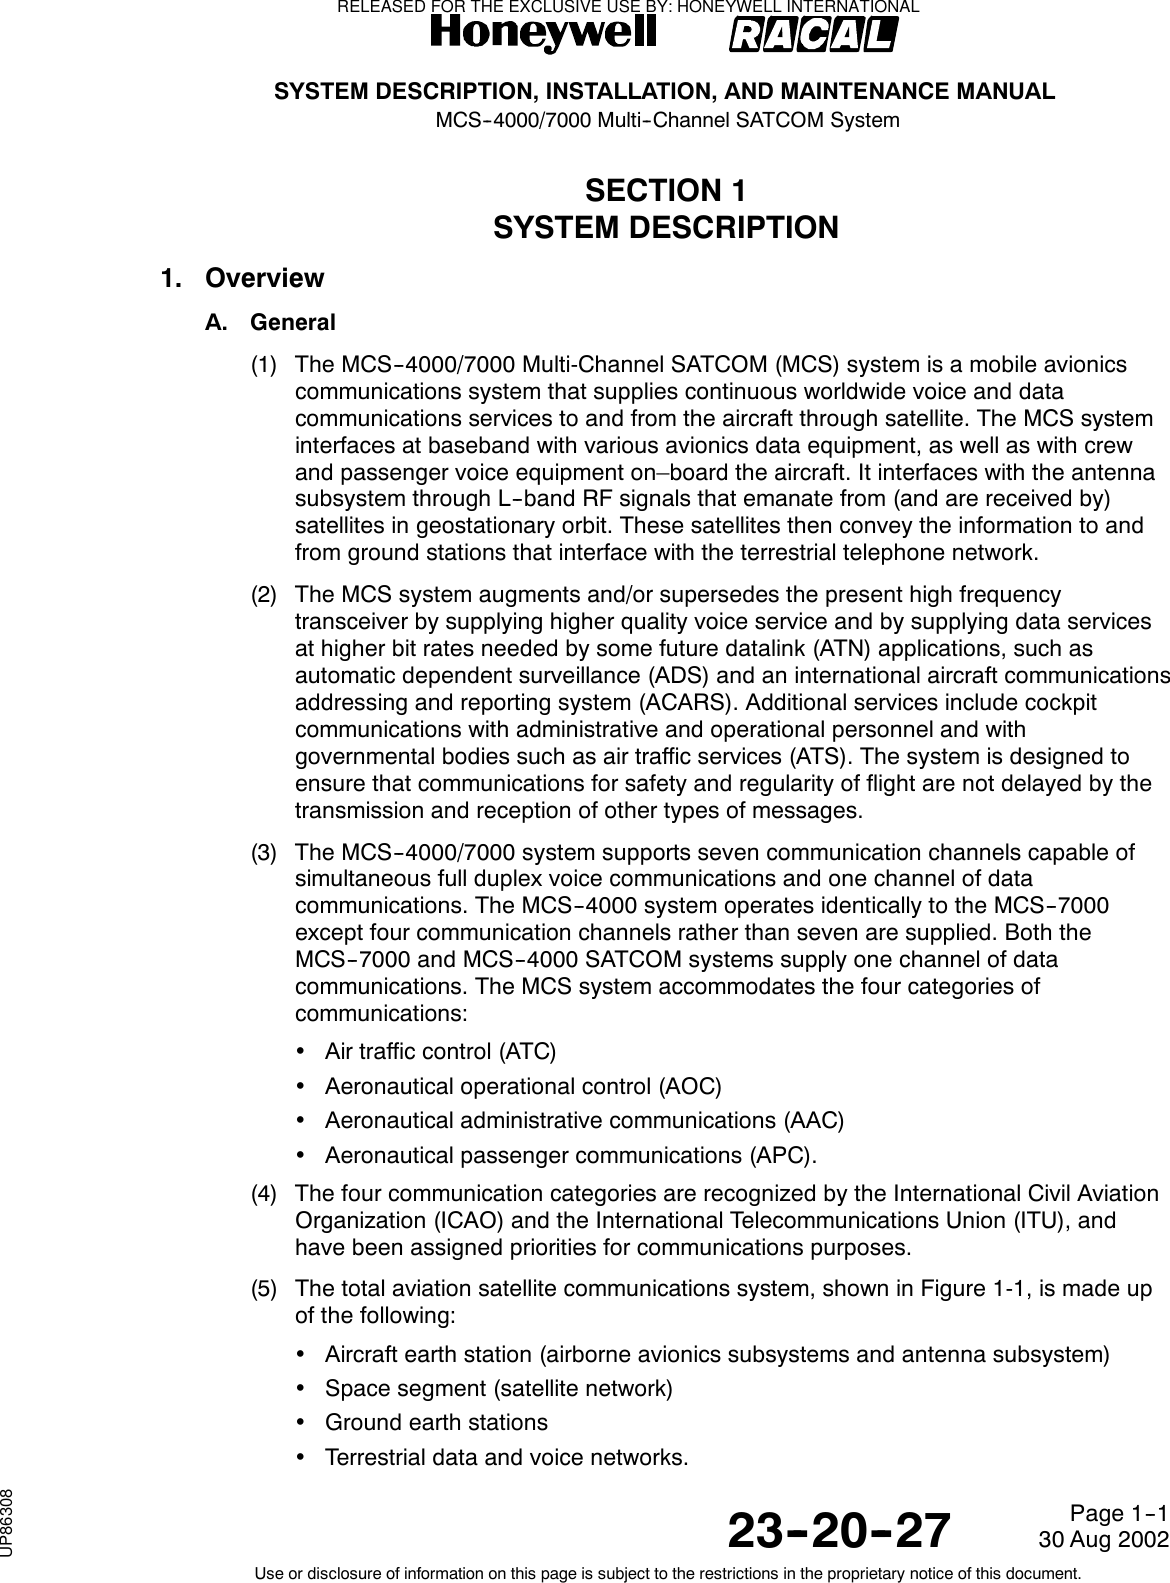 SYSTEM DESCRIPTION, INSTALLATION, AND MAINTENANCE MANUALMCS--4000/7000 Multi--Channel SATCOM System23--20--2730 Aug 2002Use or disclosure of information on this page is subject to the restrictions in the proprietary notice of this document.Page 1--1SECTION 1SYSTEM DESCRIPTION1. OverviewA. General(1) The MCS--4000/7000 Multi-Channel SATCOM (MCS) system is a mobile avionicscommunications system that supplies continuous worldwide voice and datacommunications services to and from the aircraft through satellite. The MCS systeminterfaces at baseband with various avionics data equipment, as well as with crewand passenger voice equipment on–board the aircraft. It interfaces with the antennasubsystem through L--band RF signals that emanate from (and are received by)satellites in geostationary orbit. These satellites then convey the information to andfrom ground stations that interface with the terrestrial telephone network.(2) The MCS system augments and/or supersedes the present high frequencytransceiver by supplying higher quality voice service and by supplying data servicesat higher bit rates needed by some future datalink (ATN) applications, such asautomatic dependent surveillance (ADS) and an international aircraft communicationsaddressing and reporting system (ACARS). Additional services include cockpitcommunications with administrative and operational personnel and withgovernmental bodies such as air traffic services (ATS). The system is designed toensure that communications for safety and regularity of flight are not delayed by thetransmission and reception of other types of messages.(3) The MCS--4000/7000 system supports seven communication channels capable ofsimultaneous full duplex voice communications and one channel of datacommunications. The MCS--4000 system operates identically to the MCS--7000except four communication channels rather than seven are supplied. Both theMCS--7000 and MCS--4000 SATCOM systems supply one channel of datacommunications. The MCS system accommodates the four categories ofcommunications:•Air traffic control (ATC)•Aeronautical operational control (AOC)•Aeronautical administrative communications (AAC)•Aeronautical passenger communications (APC).(4) The four communication categories are recognized by the International Civil AviationOrganization (ICAO) and the International Telecommunications Union (ITU), andhave been assigned priorities for communications purposes.(5) The total aviation satellite communications system, shown in Figure 1-1, is made upof the following:•Aircraft earth station (airborne avionics subsystems and antenna subsystem)•Space segment (satellite network)•Ground earth stations•Terrestrial data and voice networks.RELEASED FOR THE EXCLUSIVE USE BY: HONEYWELL INTERNATIONALUP86308